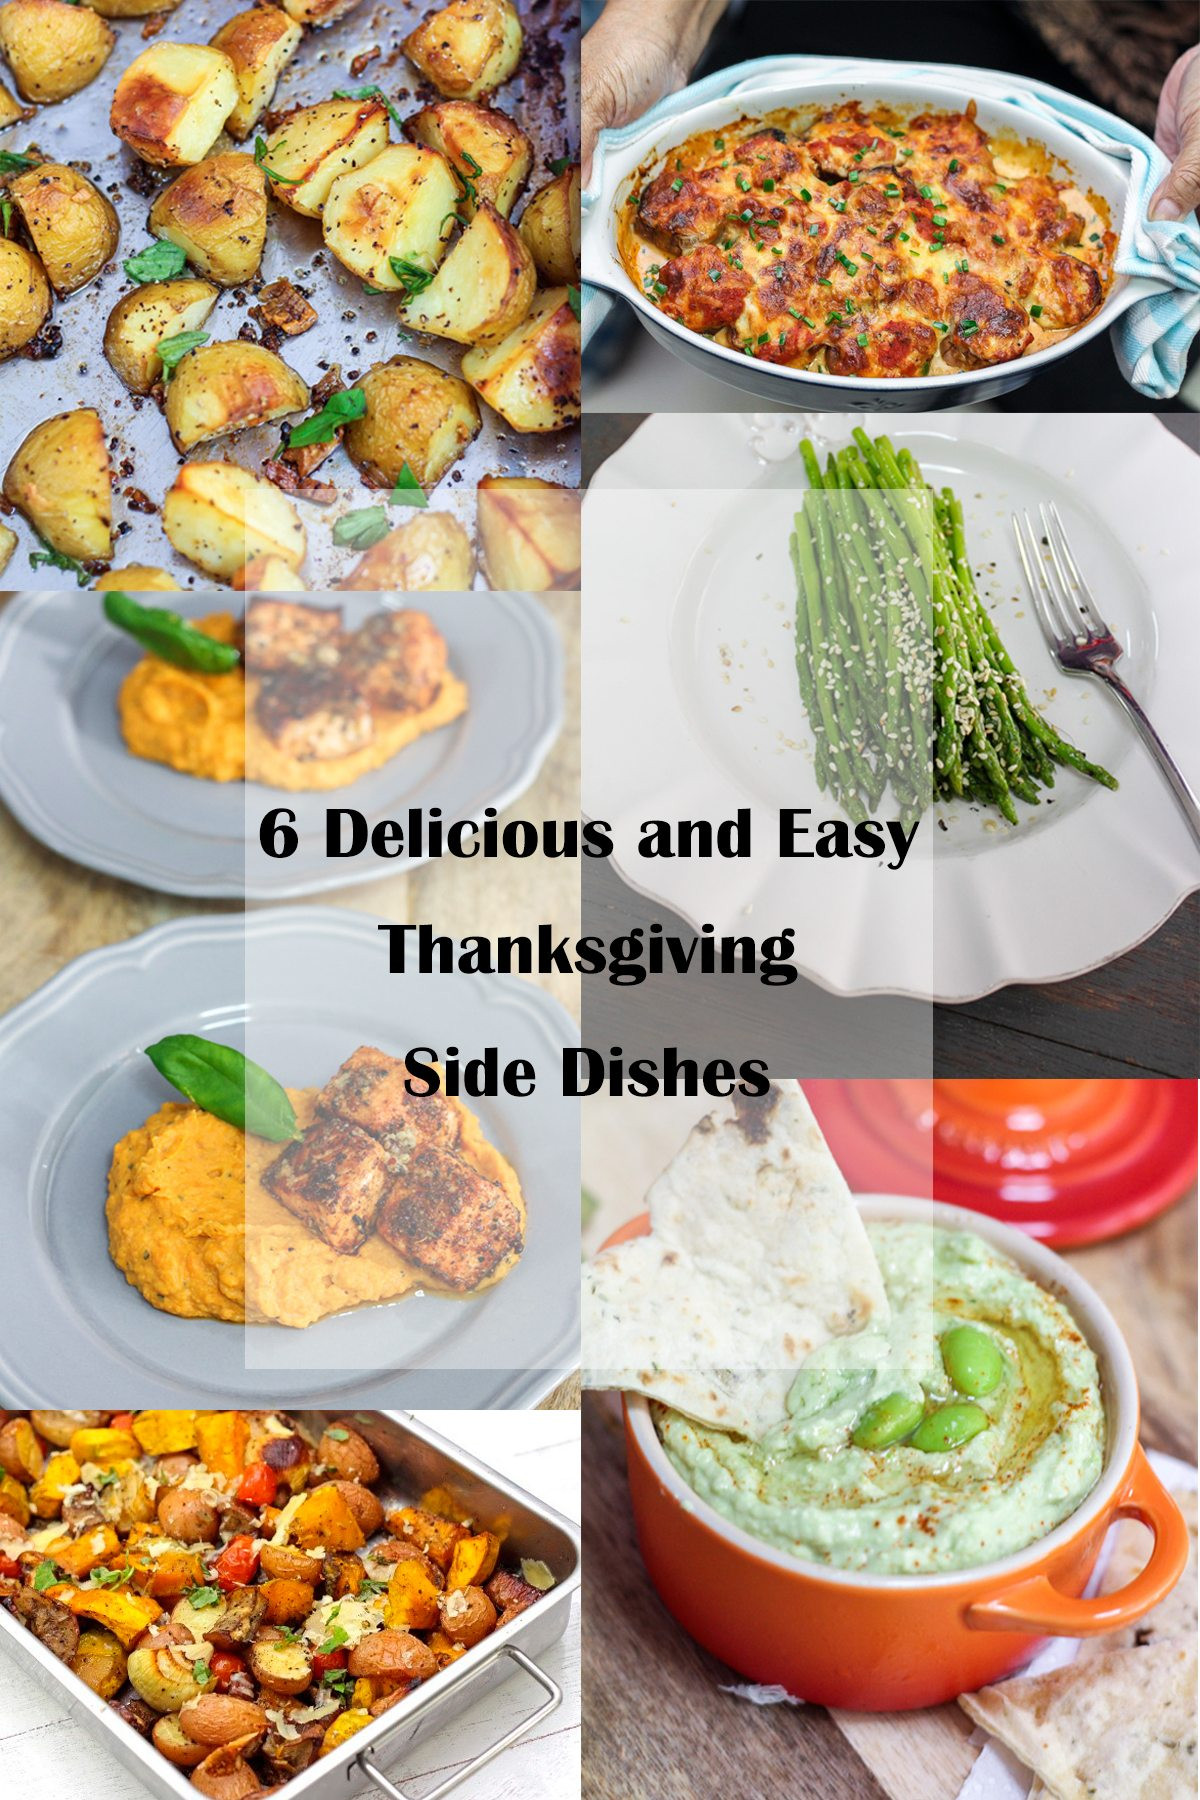 Thanksgiving Easy Side Dishes
 6 Delicious and Easy Thanksgiving Side Dishes